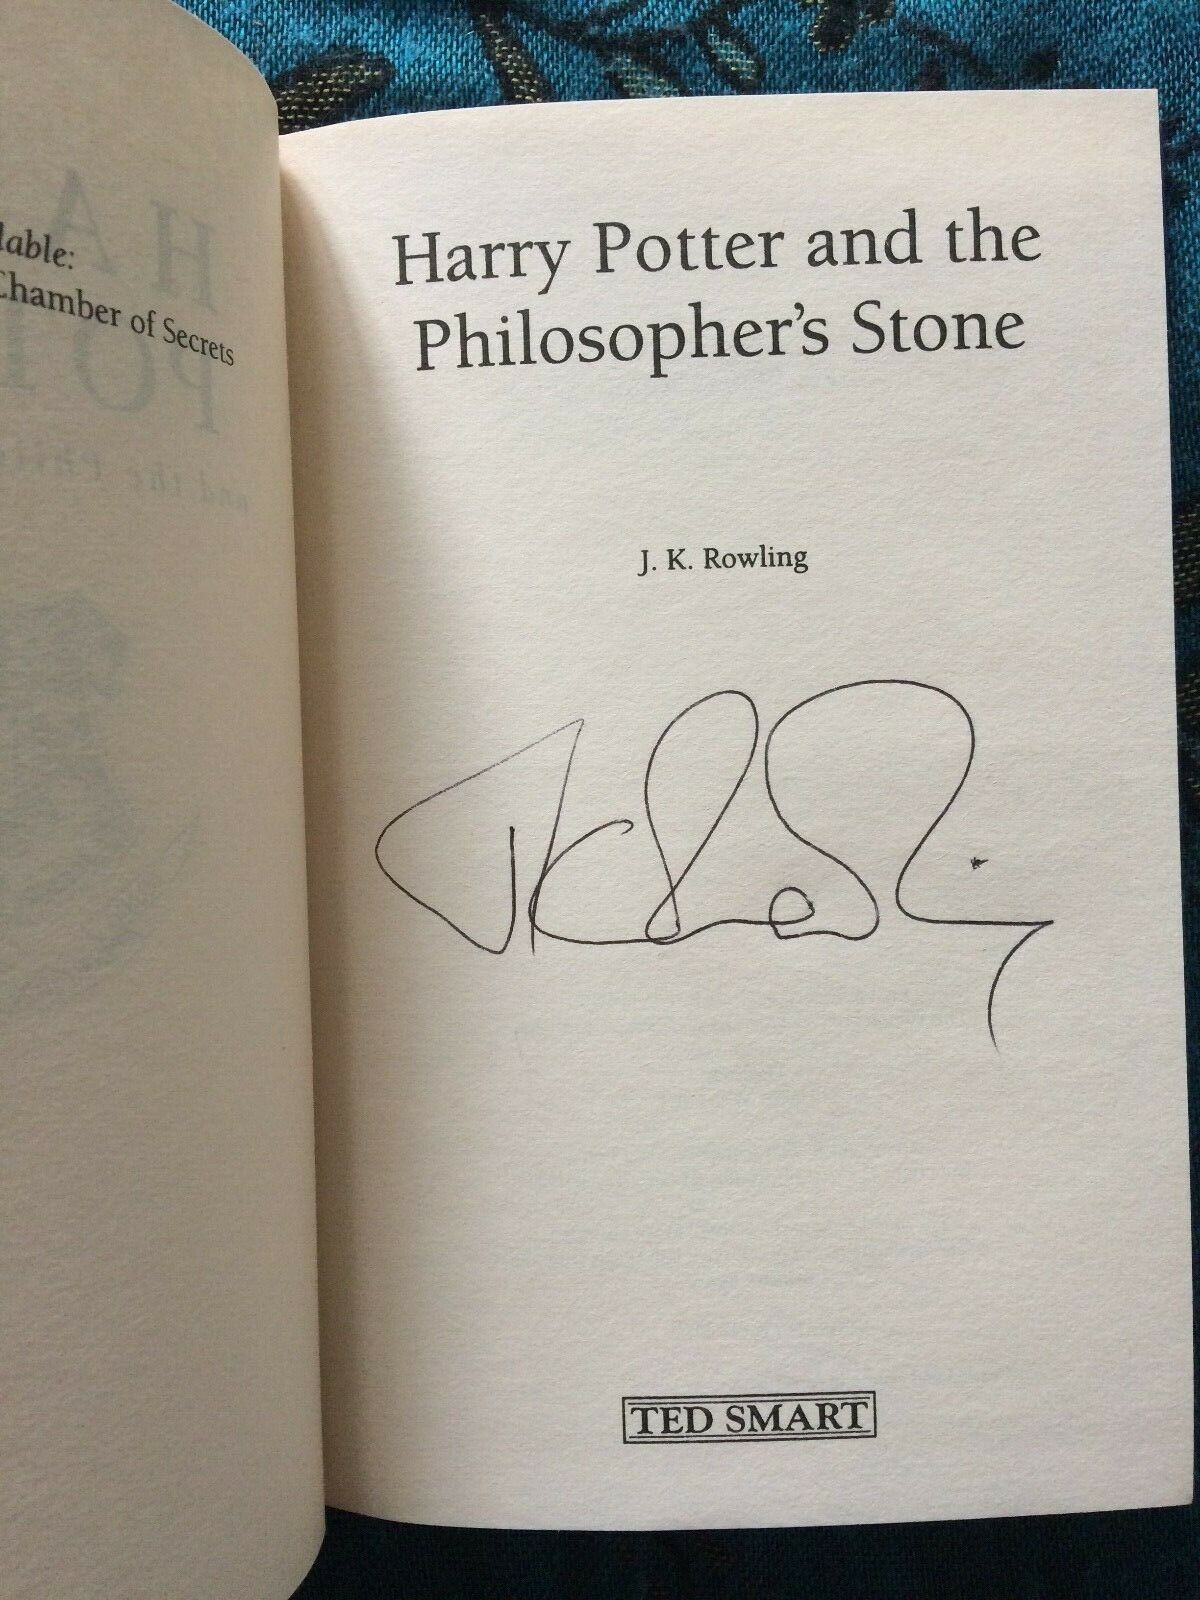 J.K. Rowling signature forgery found on ebay.